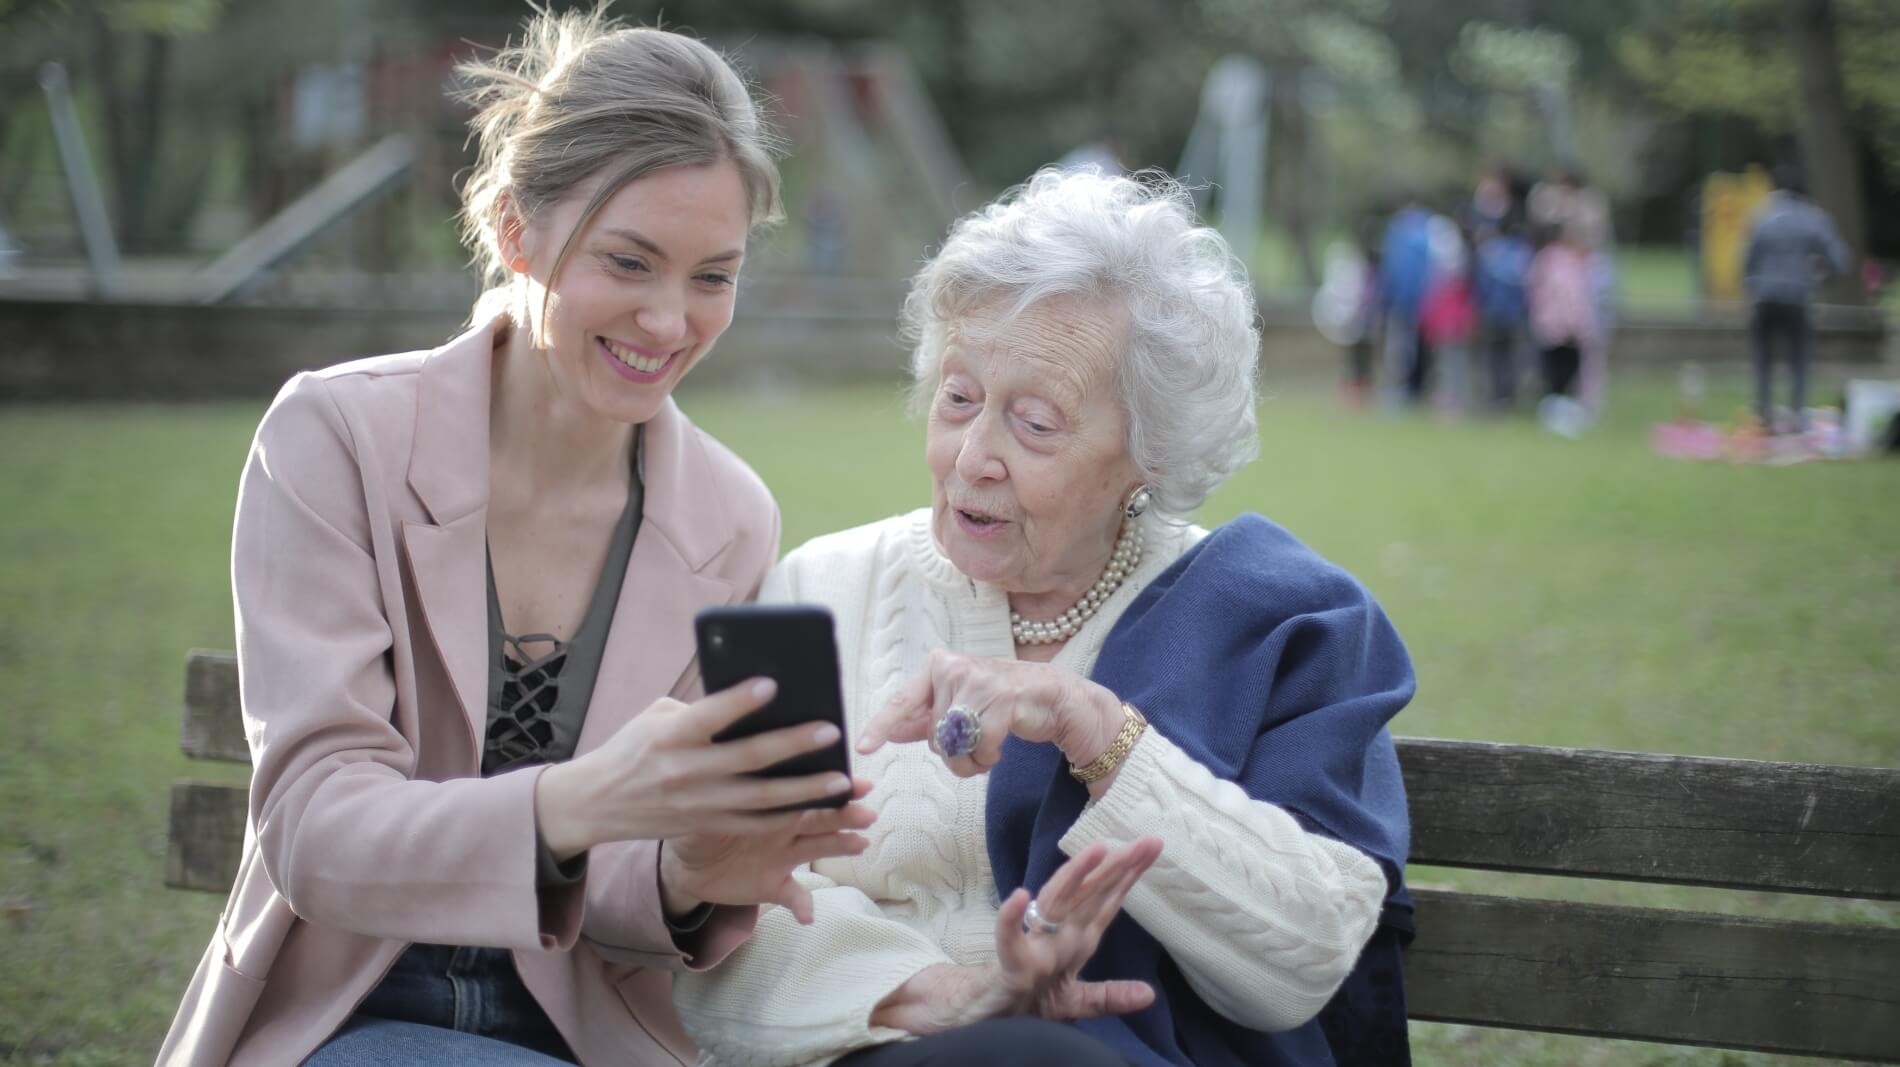 An elderly woman being shown something on a mobile phone by a younger woman